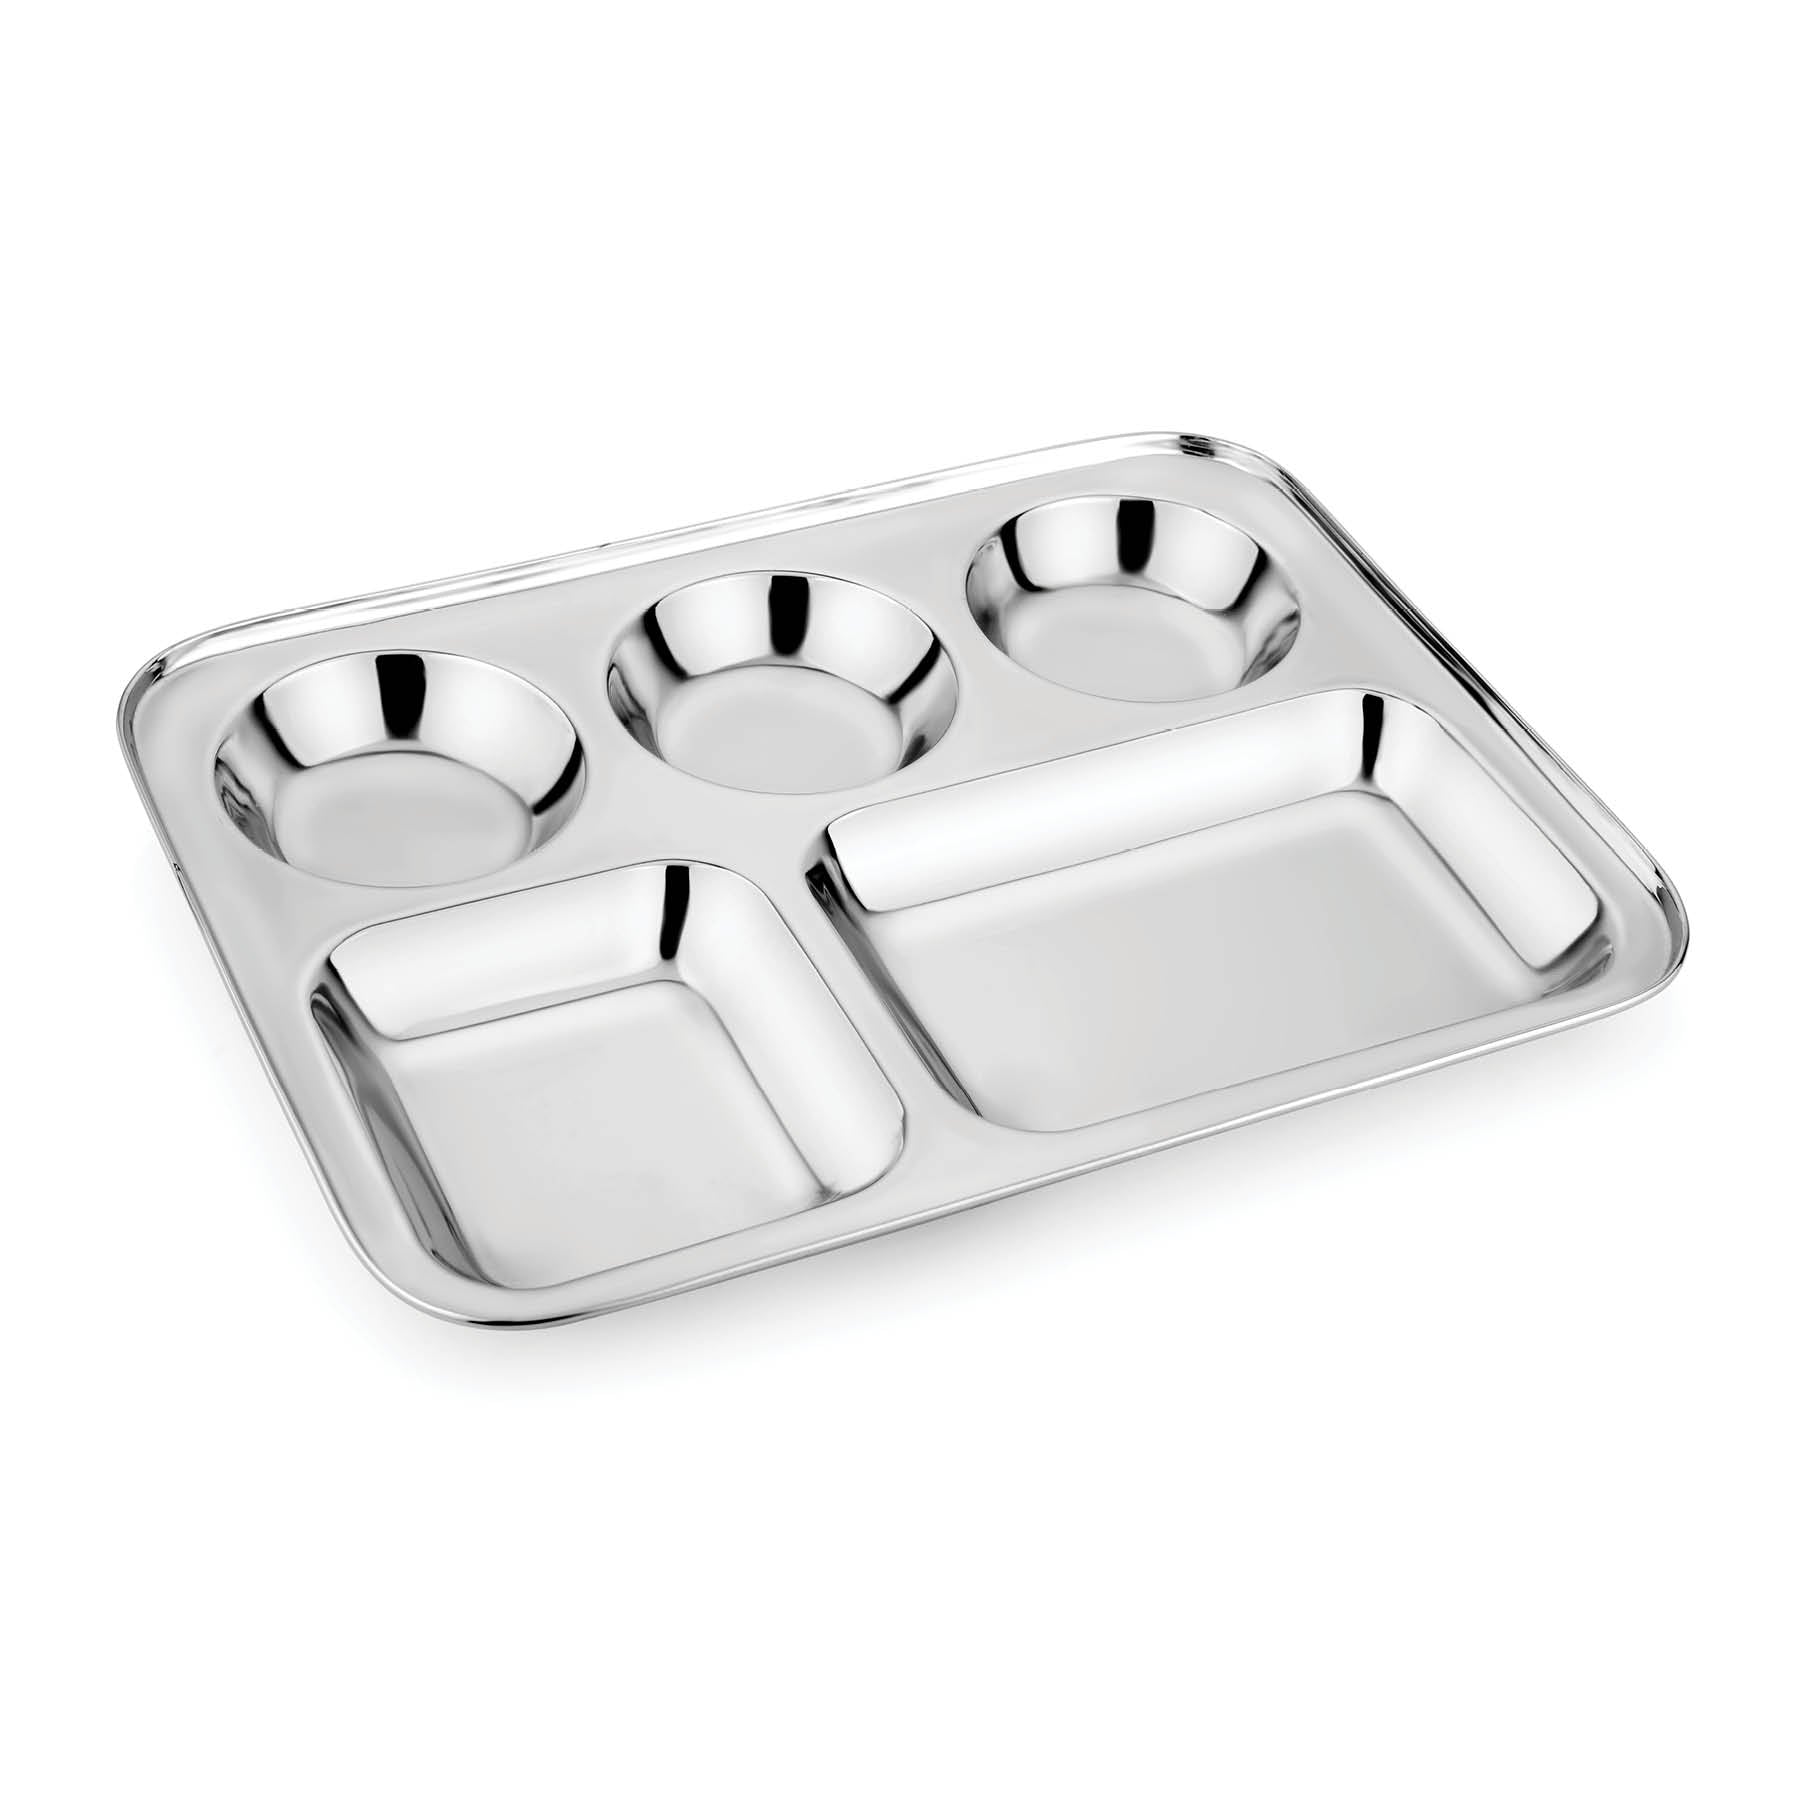 Dinner tray stainless steel